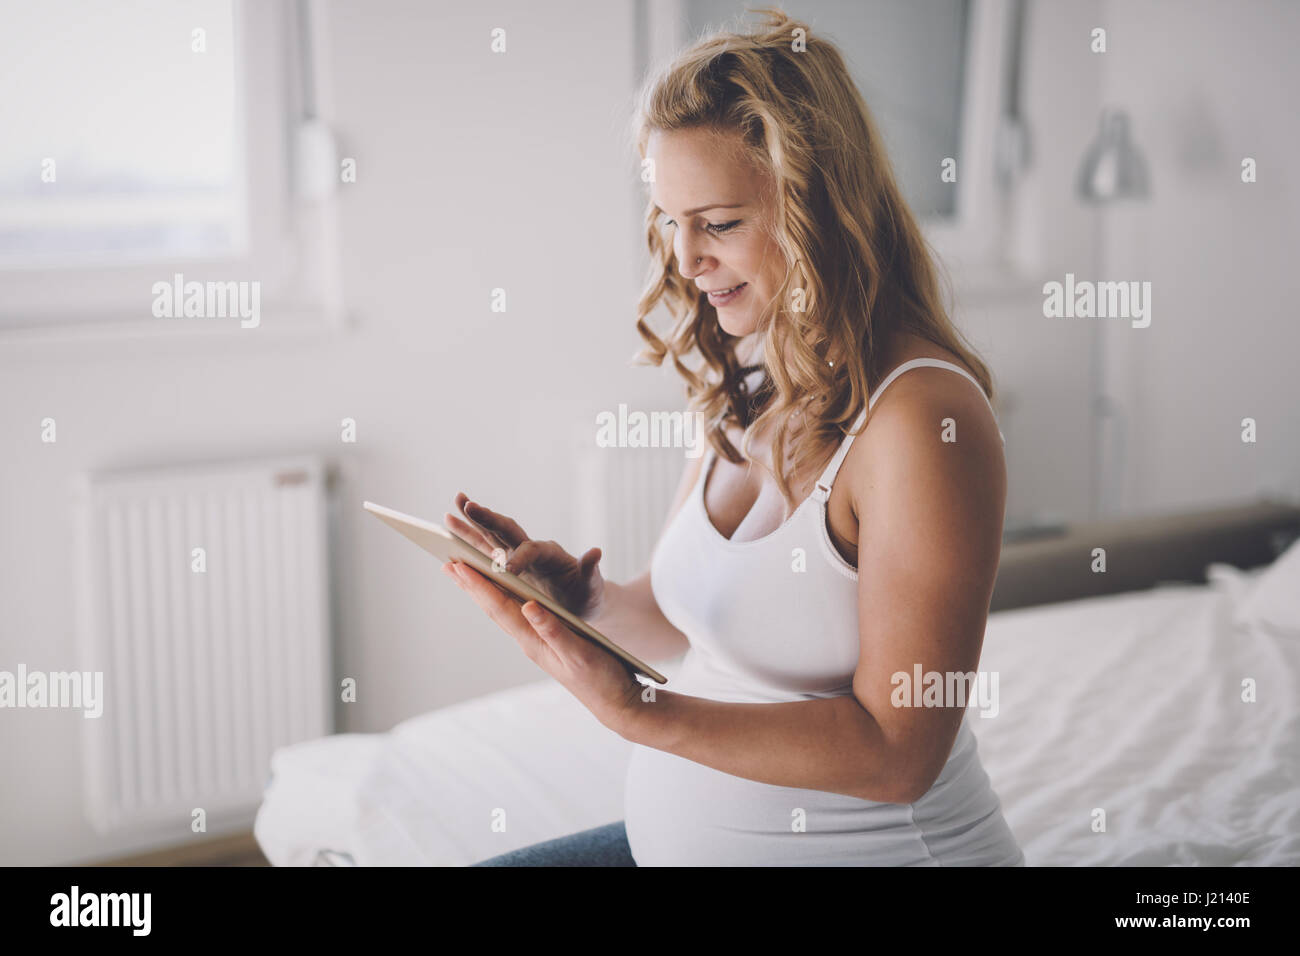 Beautiful expectant pregnant woman using tablet and smiling Stock Photo